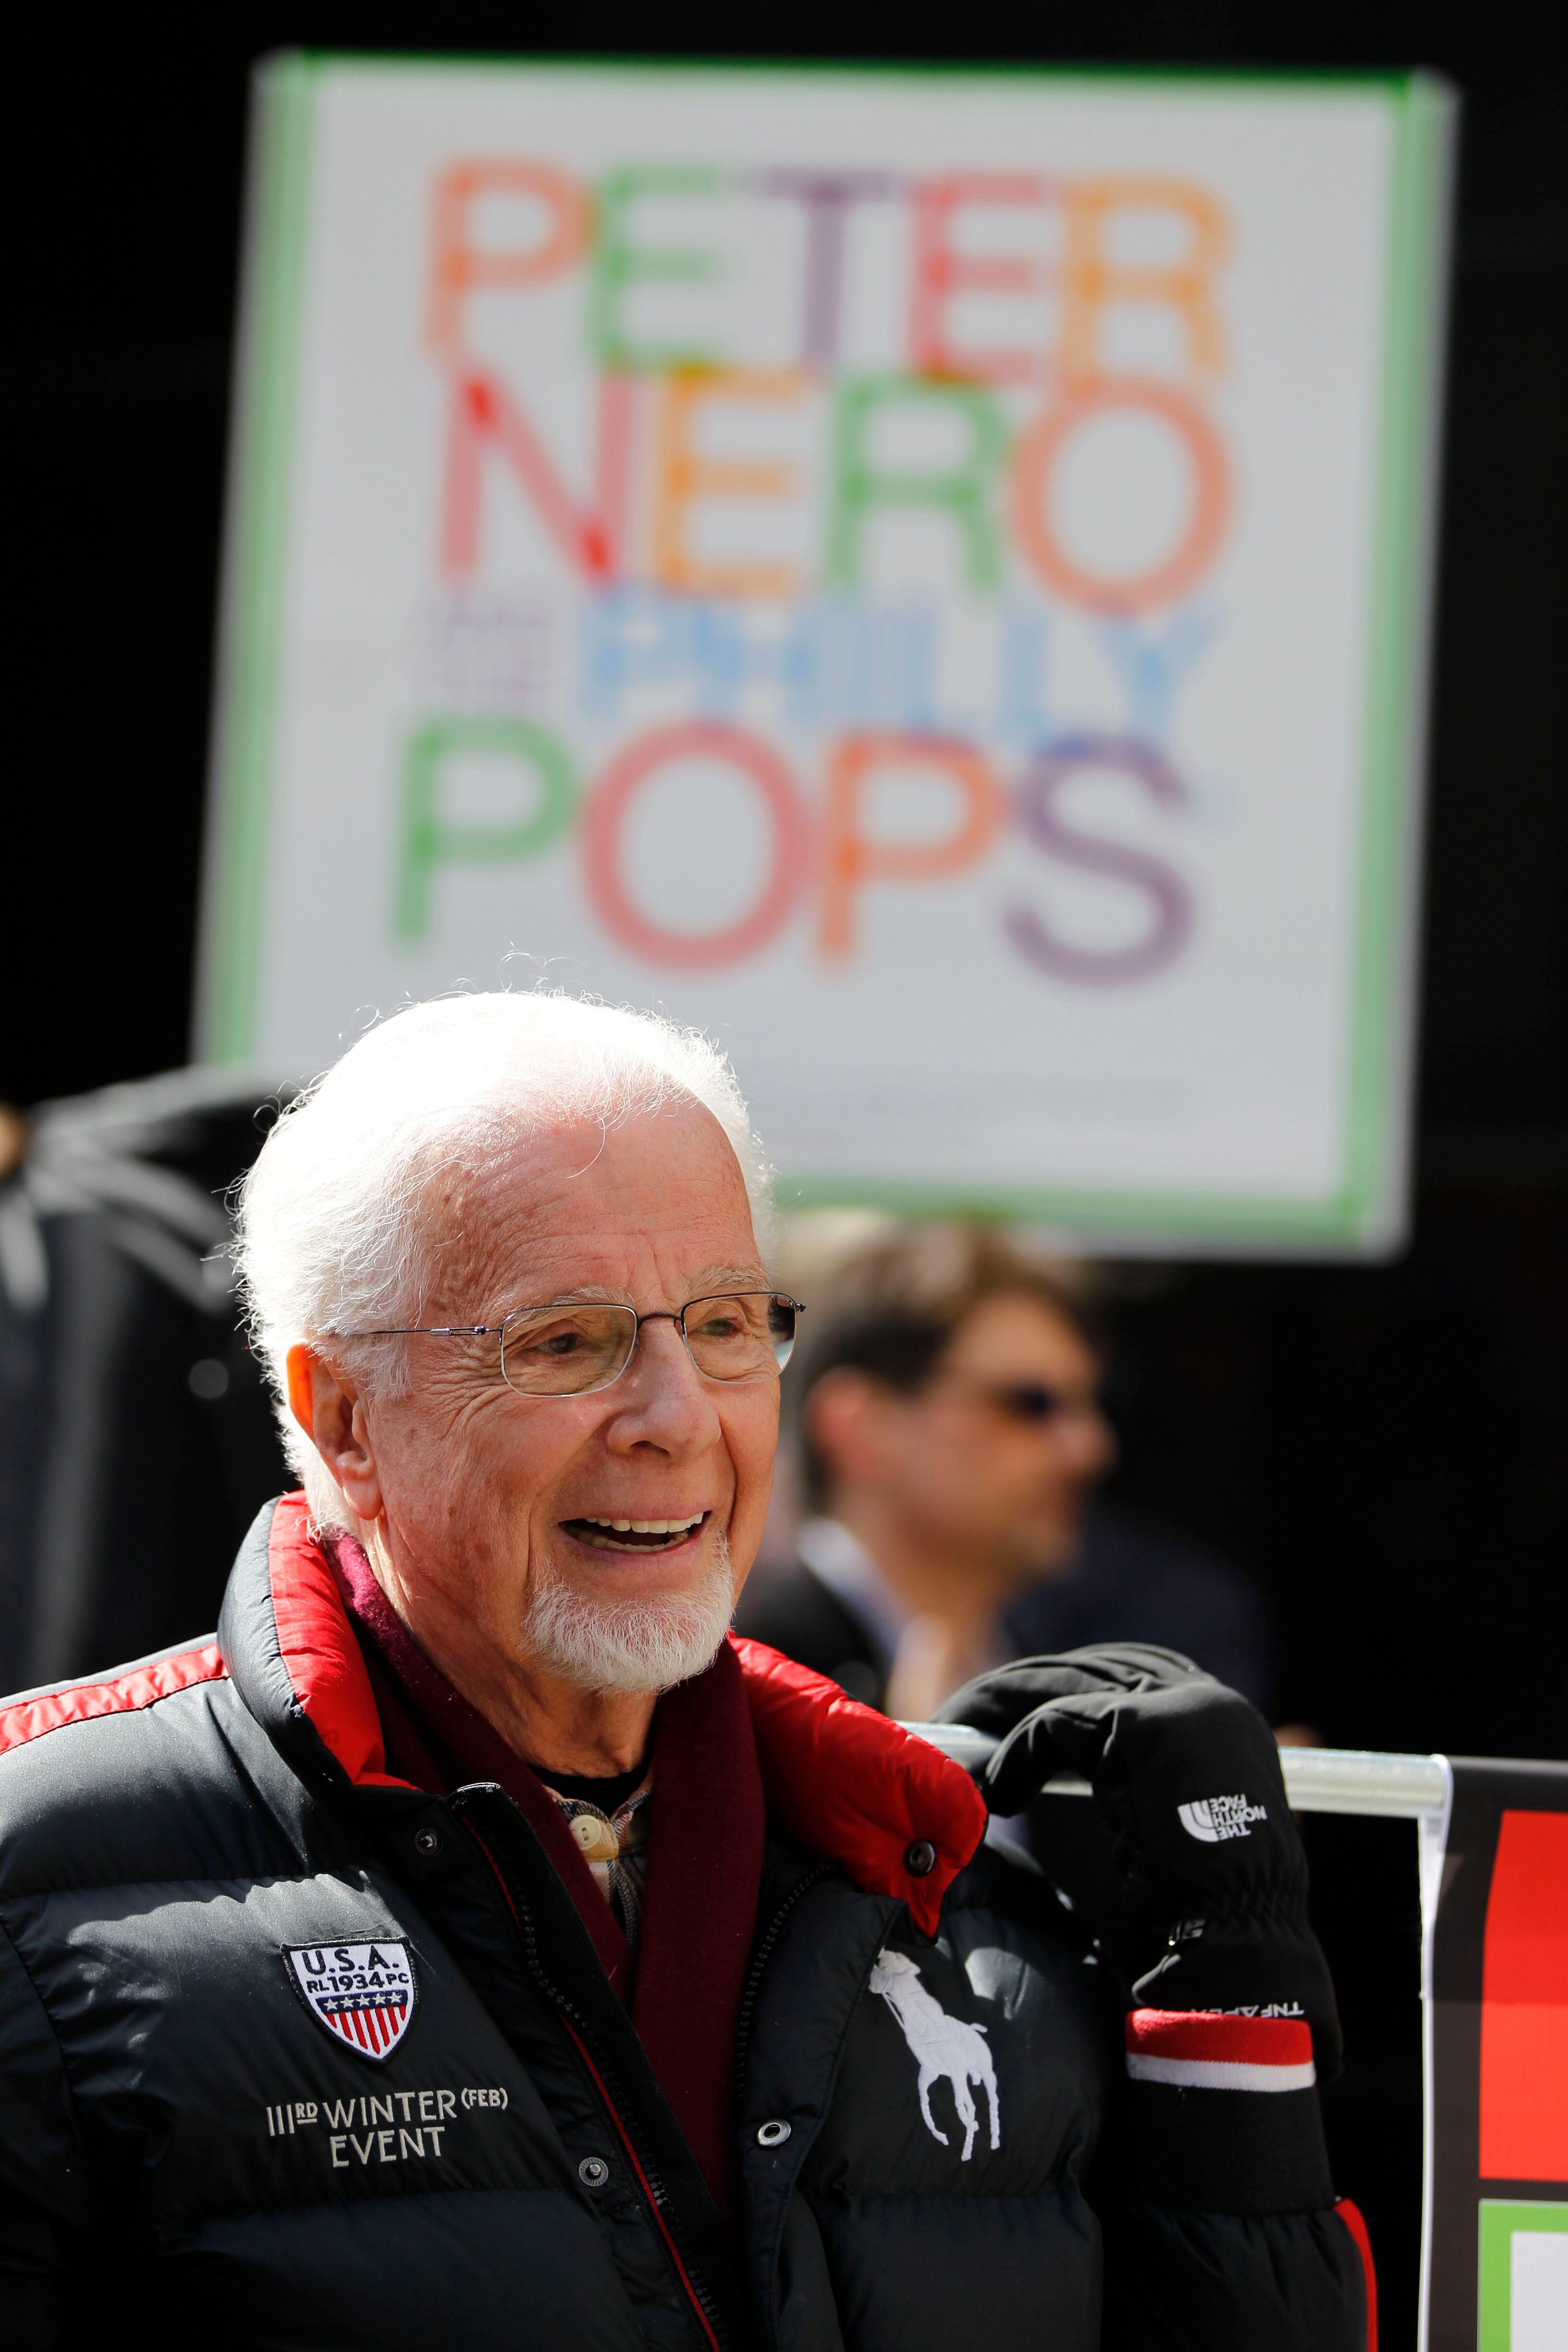 Peter Nero, a Grammy-winning pianist and ex-conductor of the Philly Pops, dies at 89